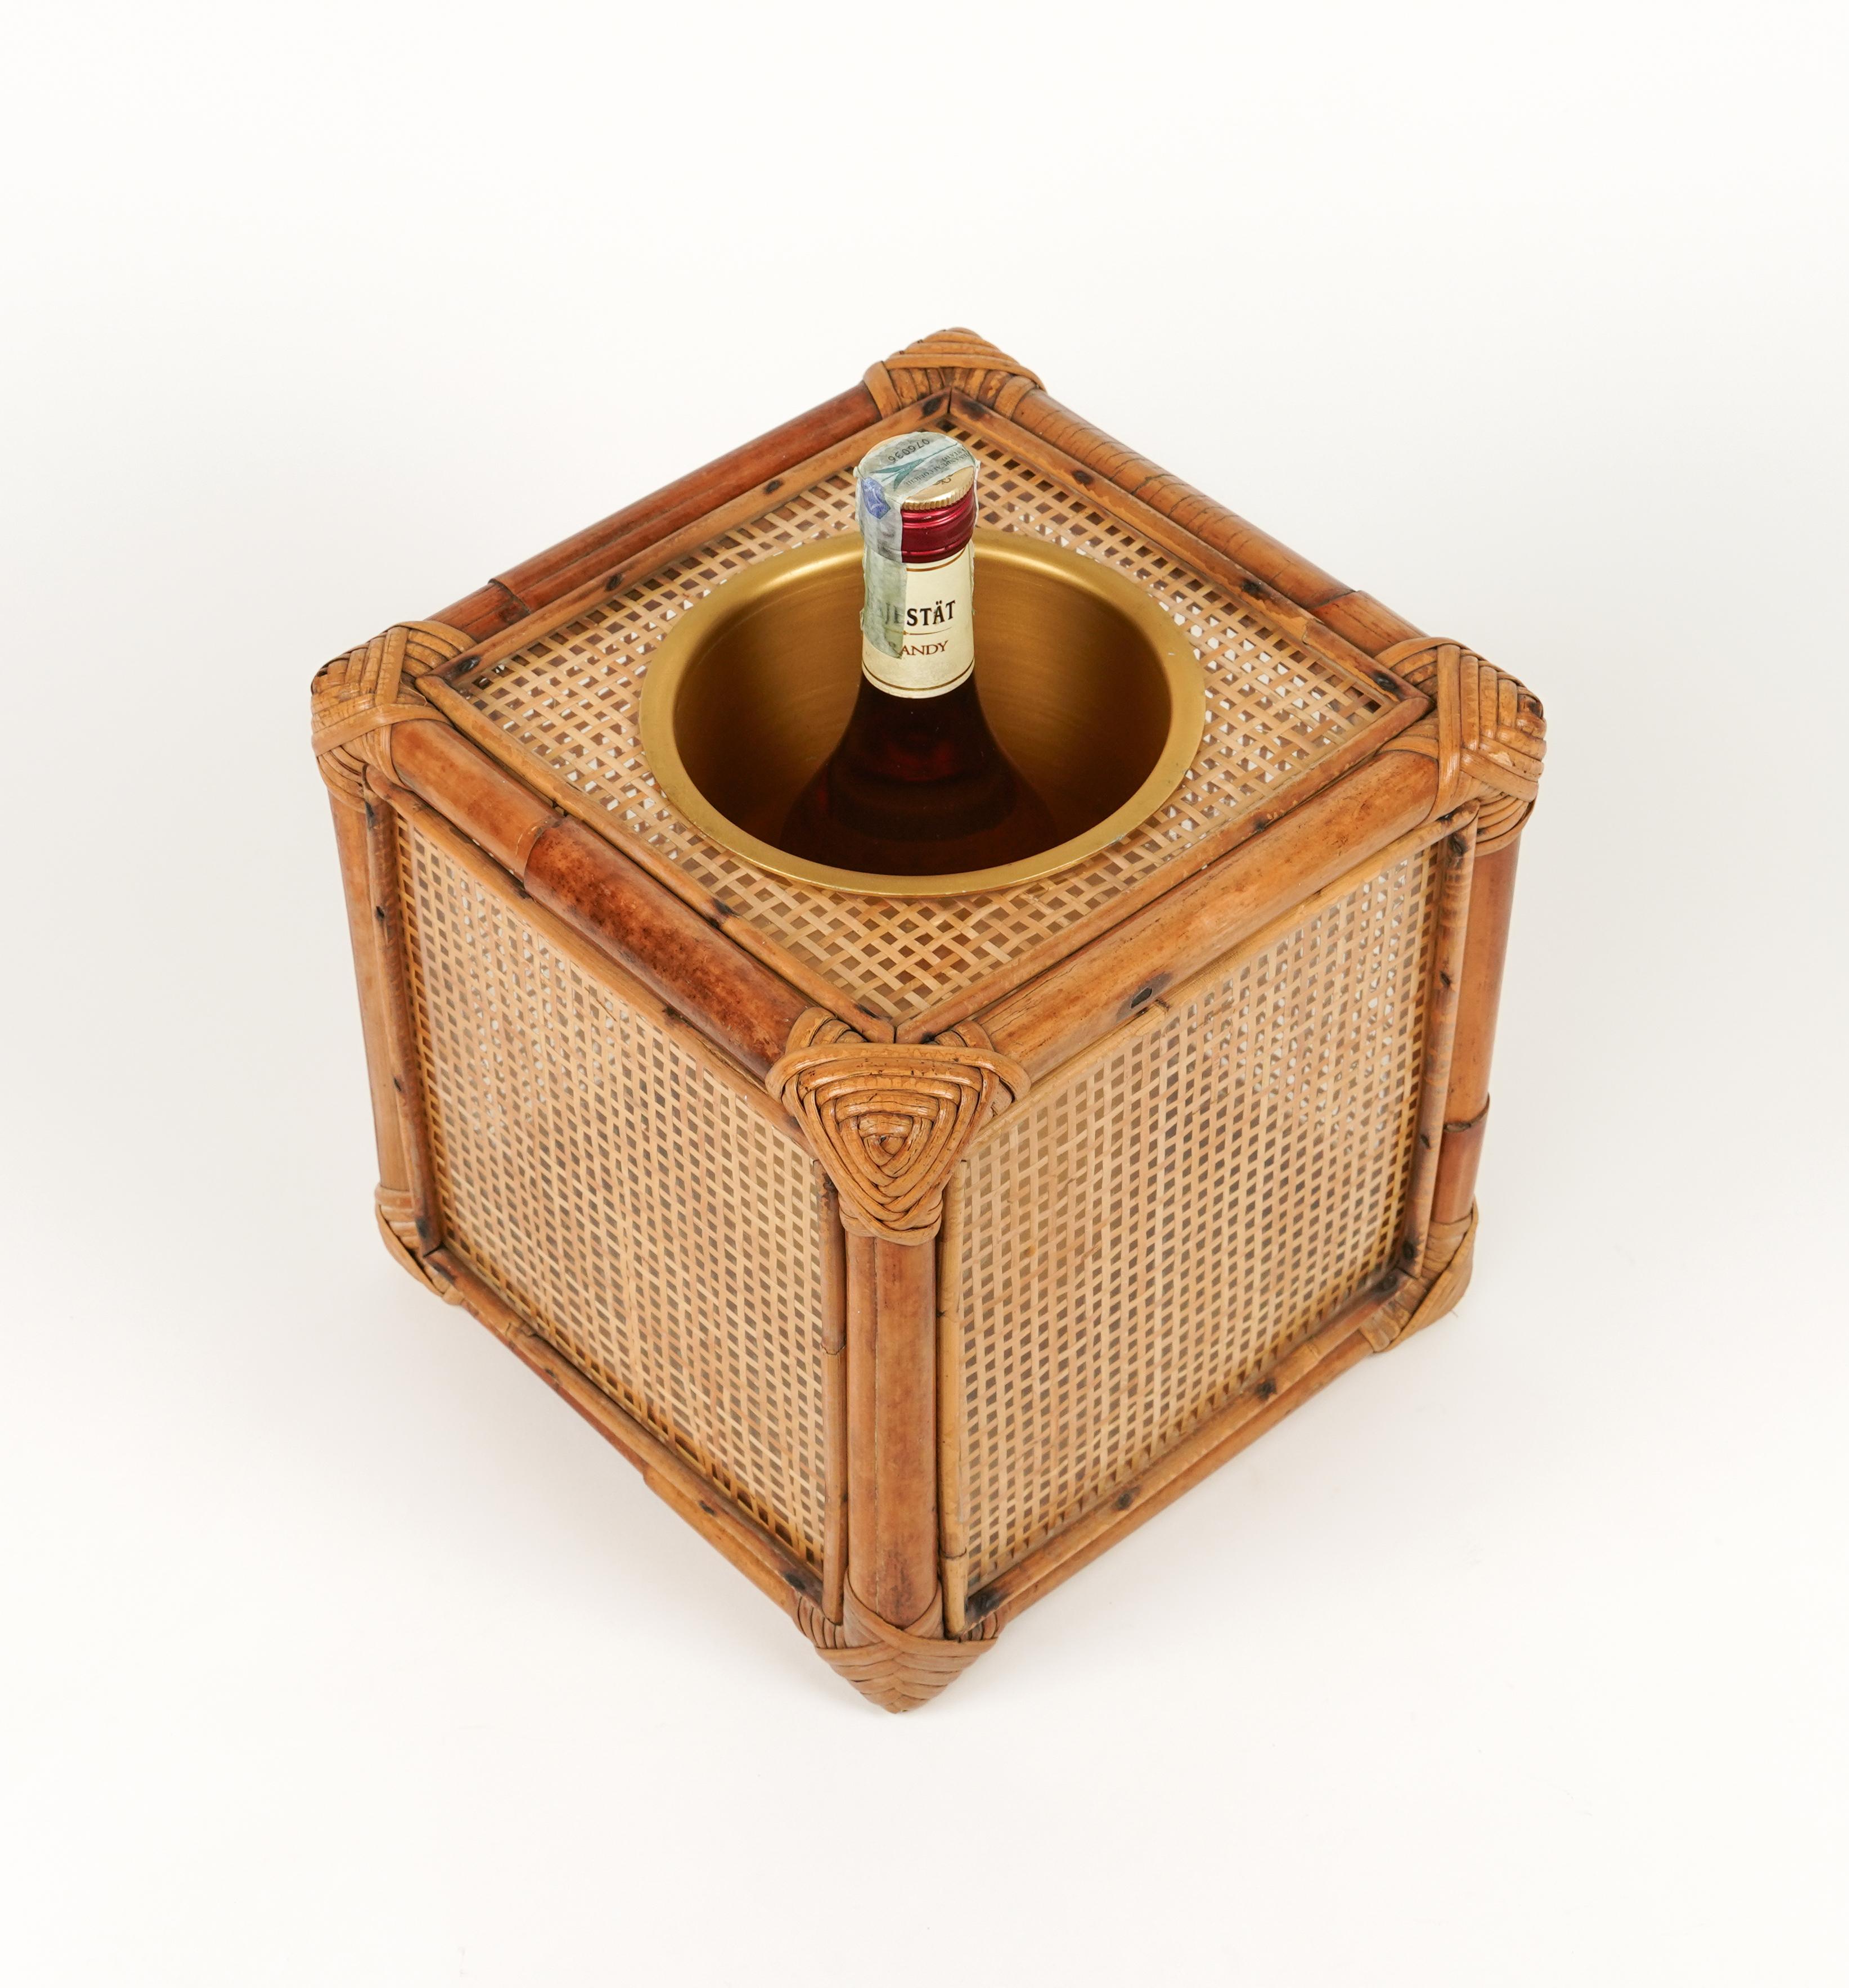 Mid-Century Modern Ice Bucket in Bamboo, Rattan and Lucite Christian Dior Style, Italy 1970s For Sale